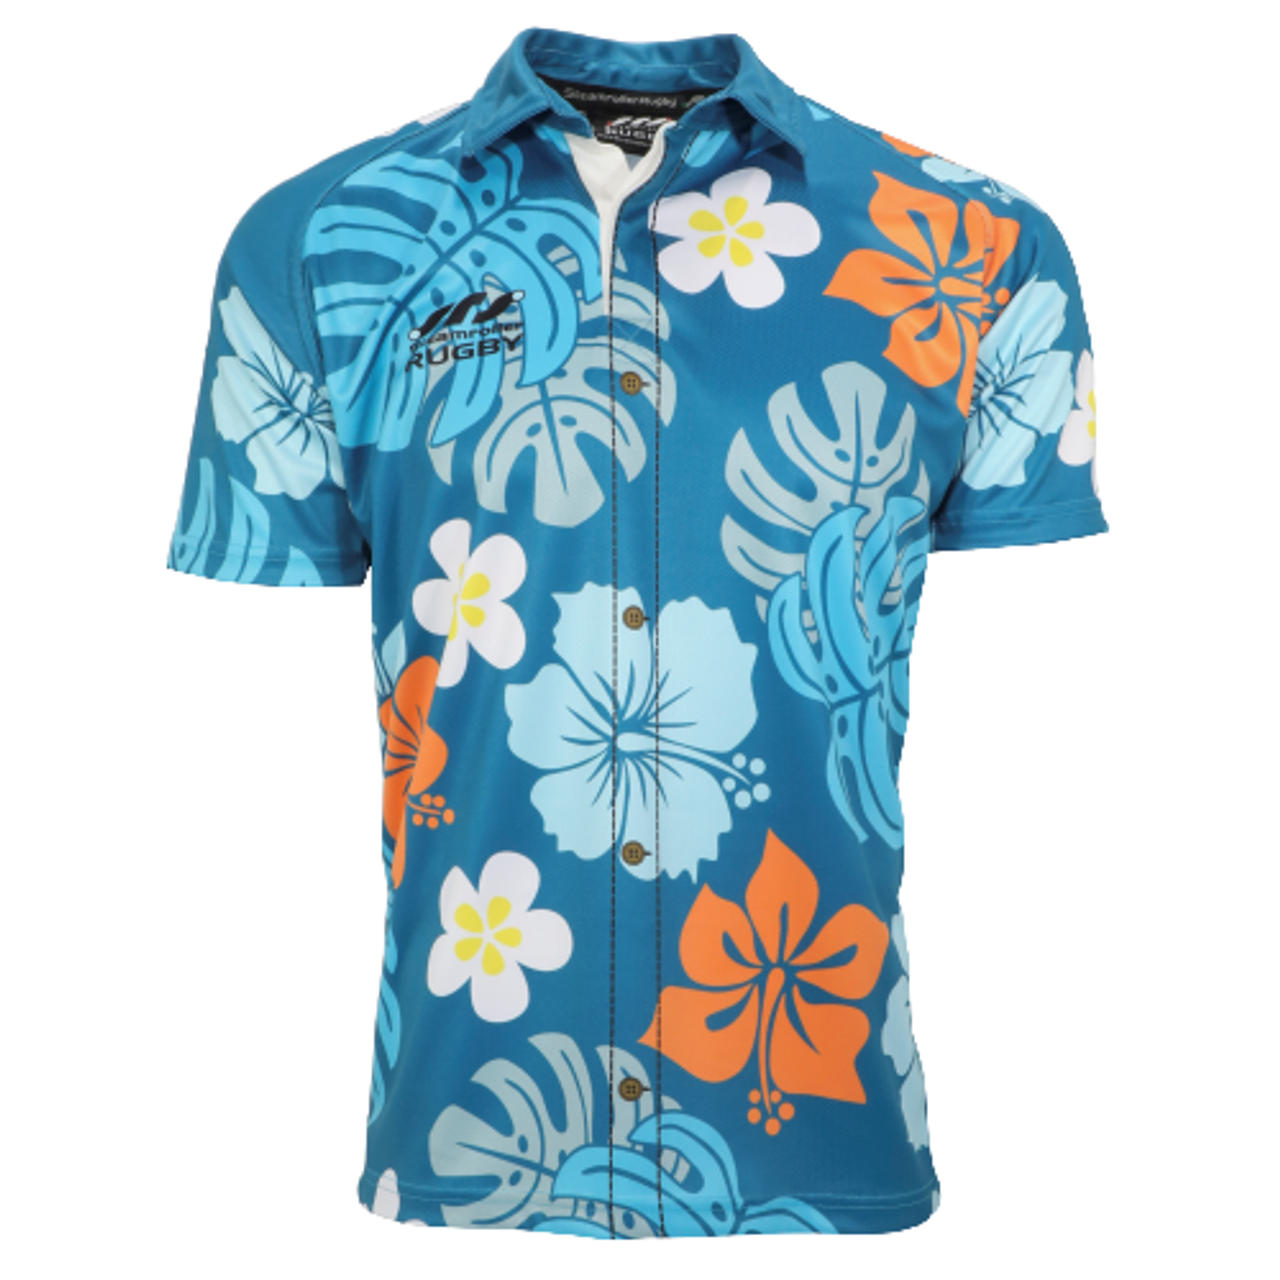 Hawaiian Pattern Rugby Jersey Steamroller Rugby